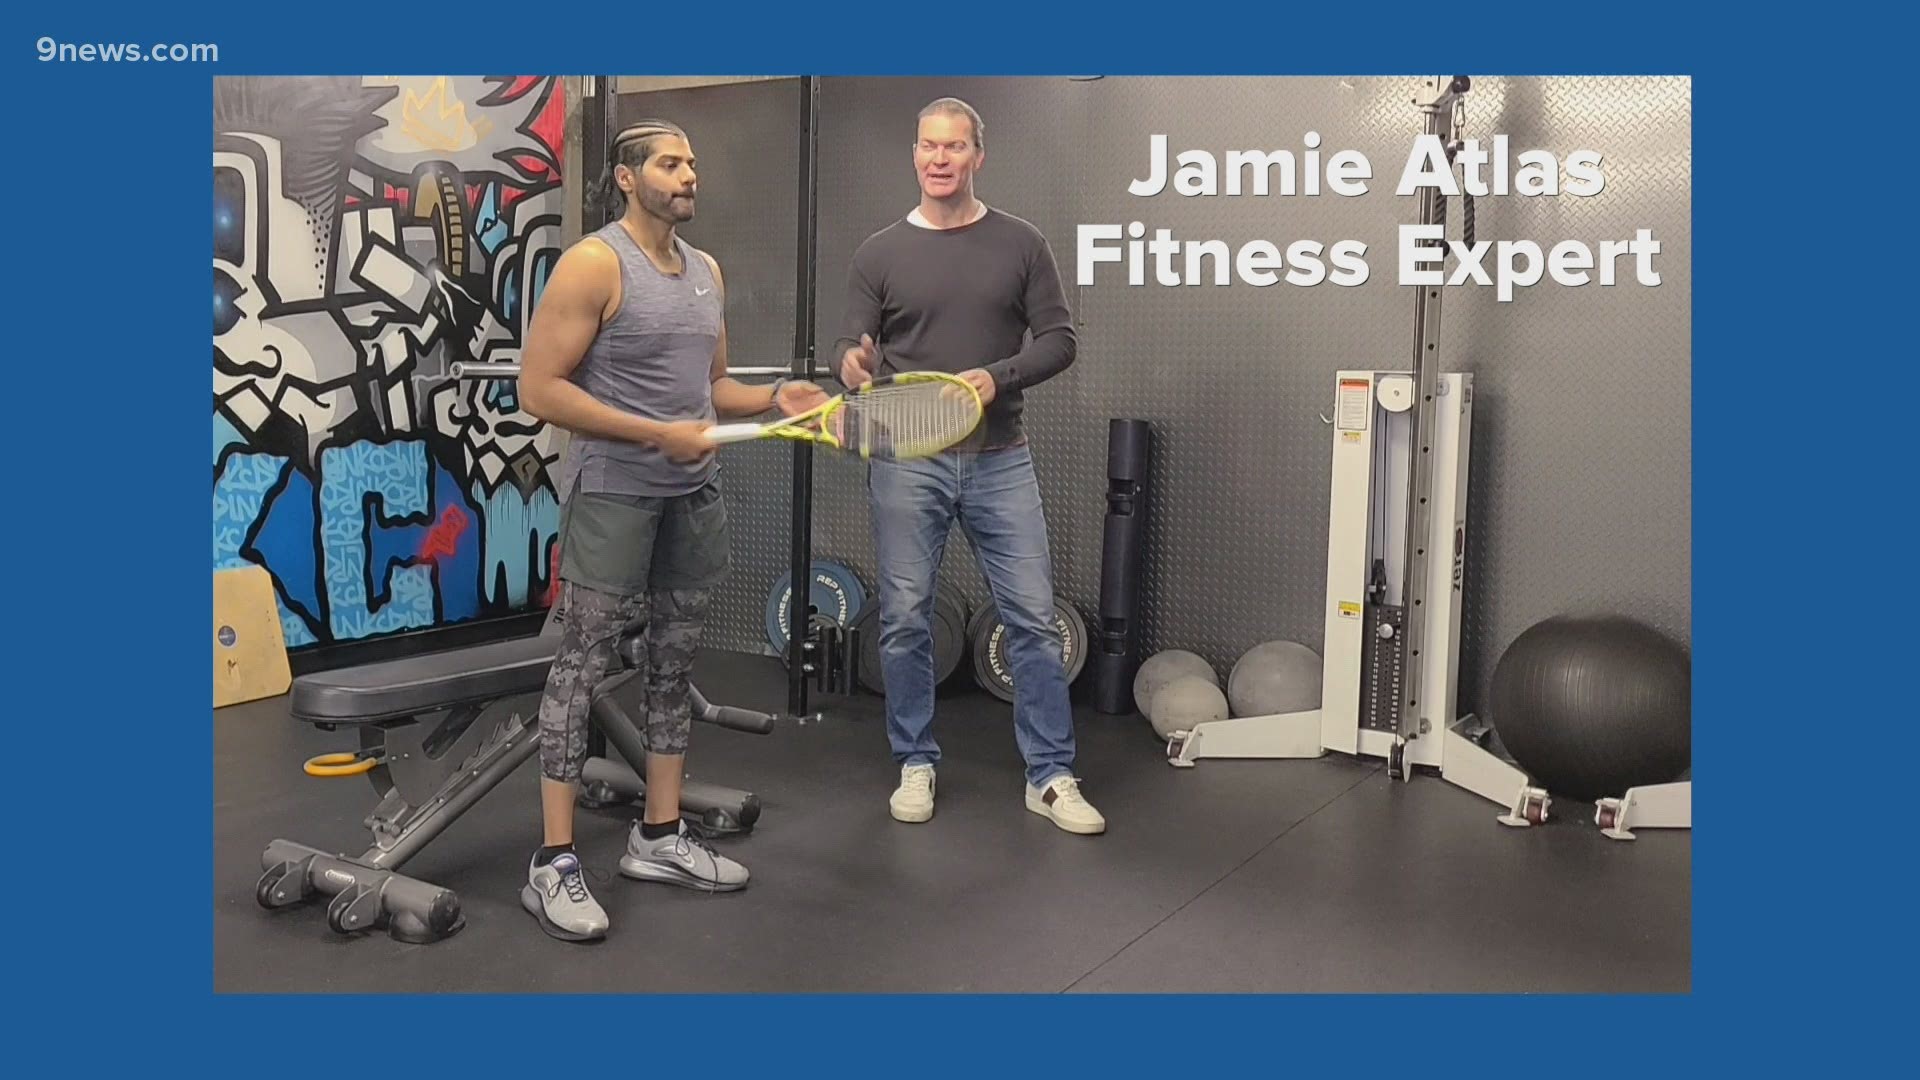 9NEWS Fitness Expert Jamie Atlas shares two workout exercises that can help with hip mobility.